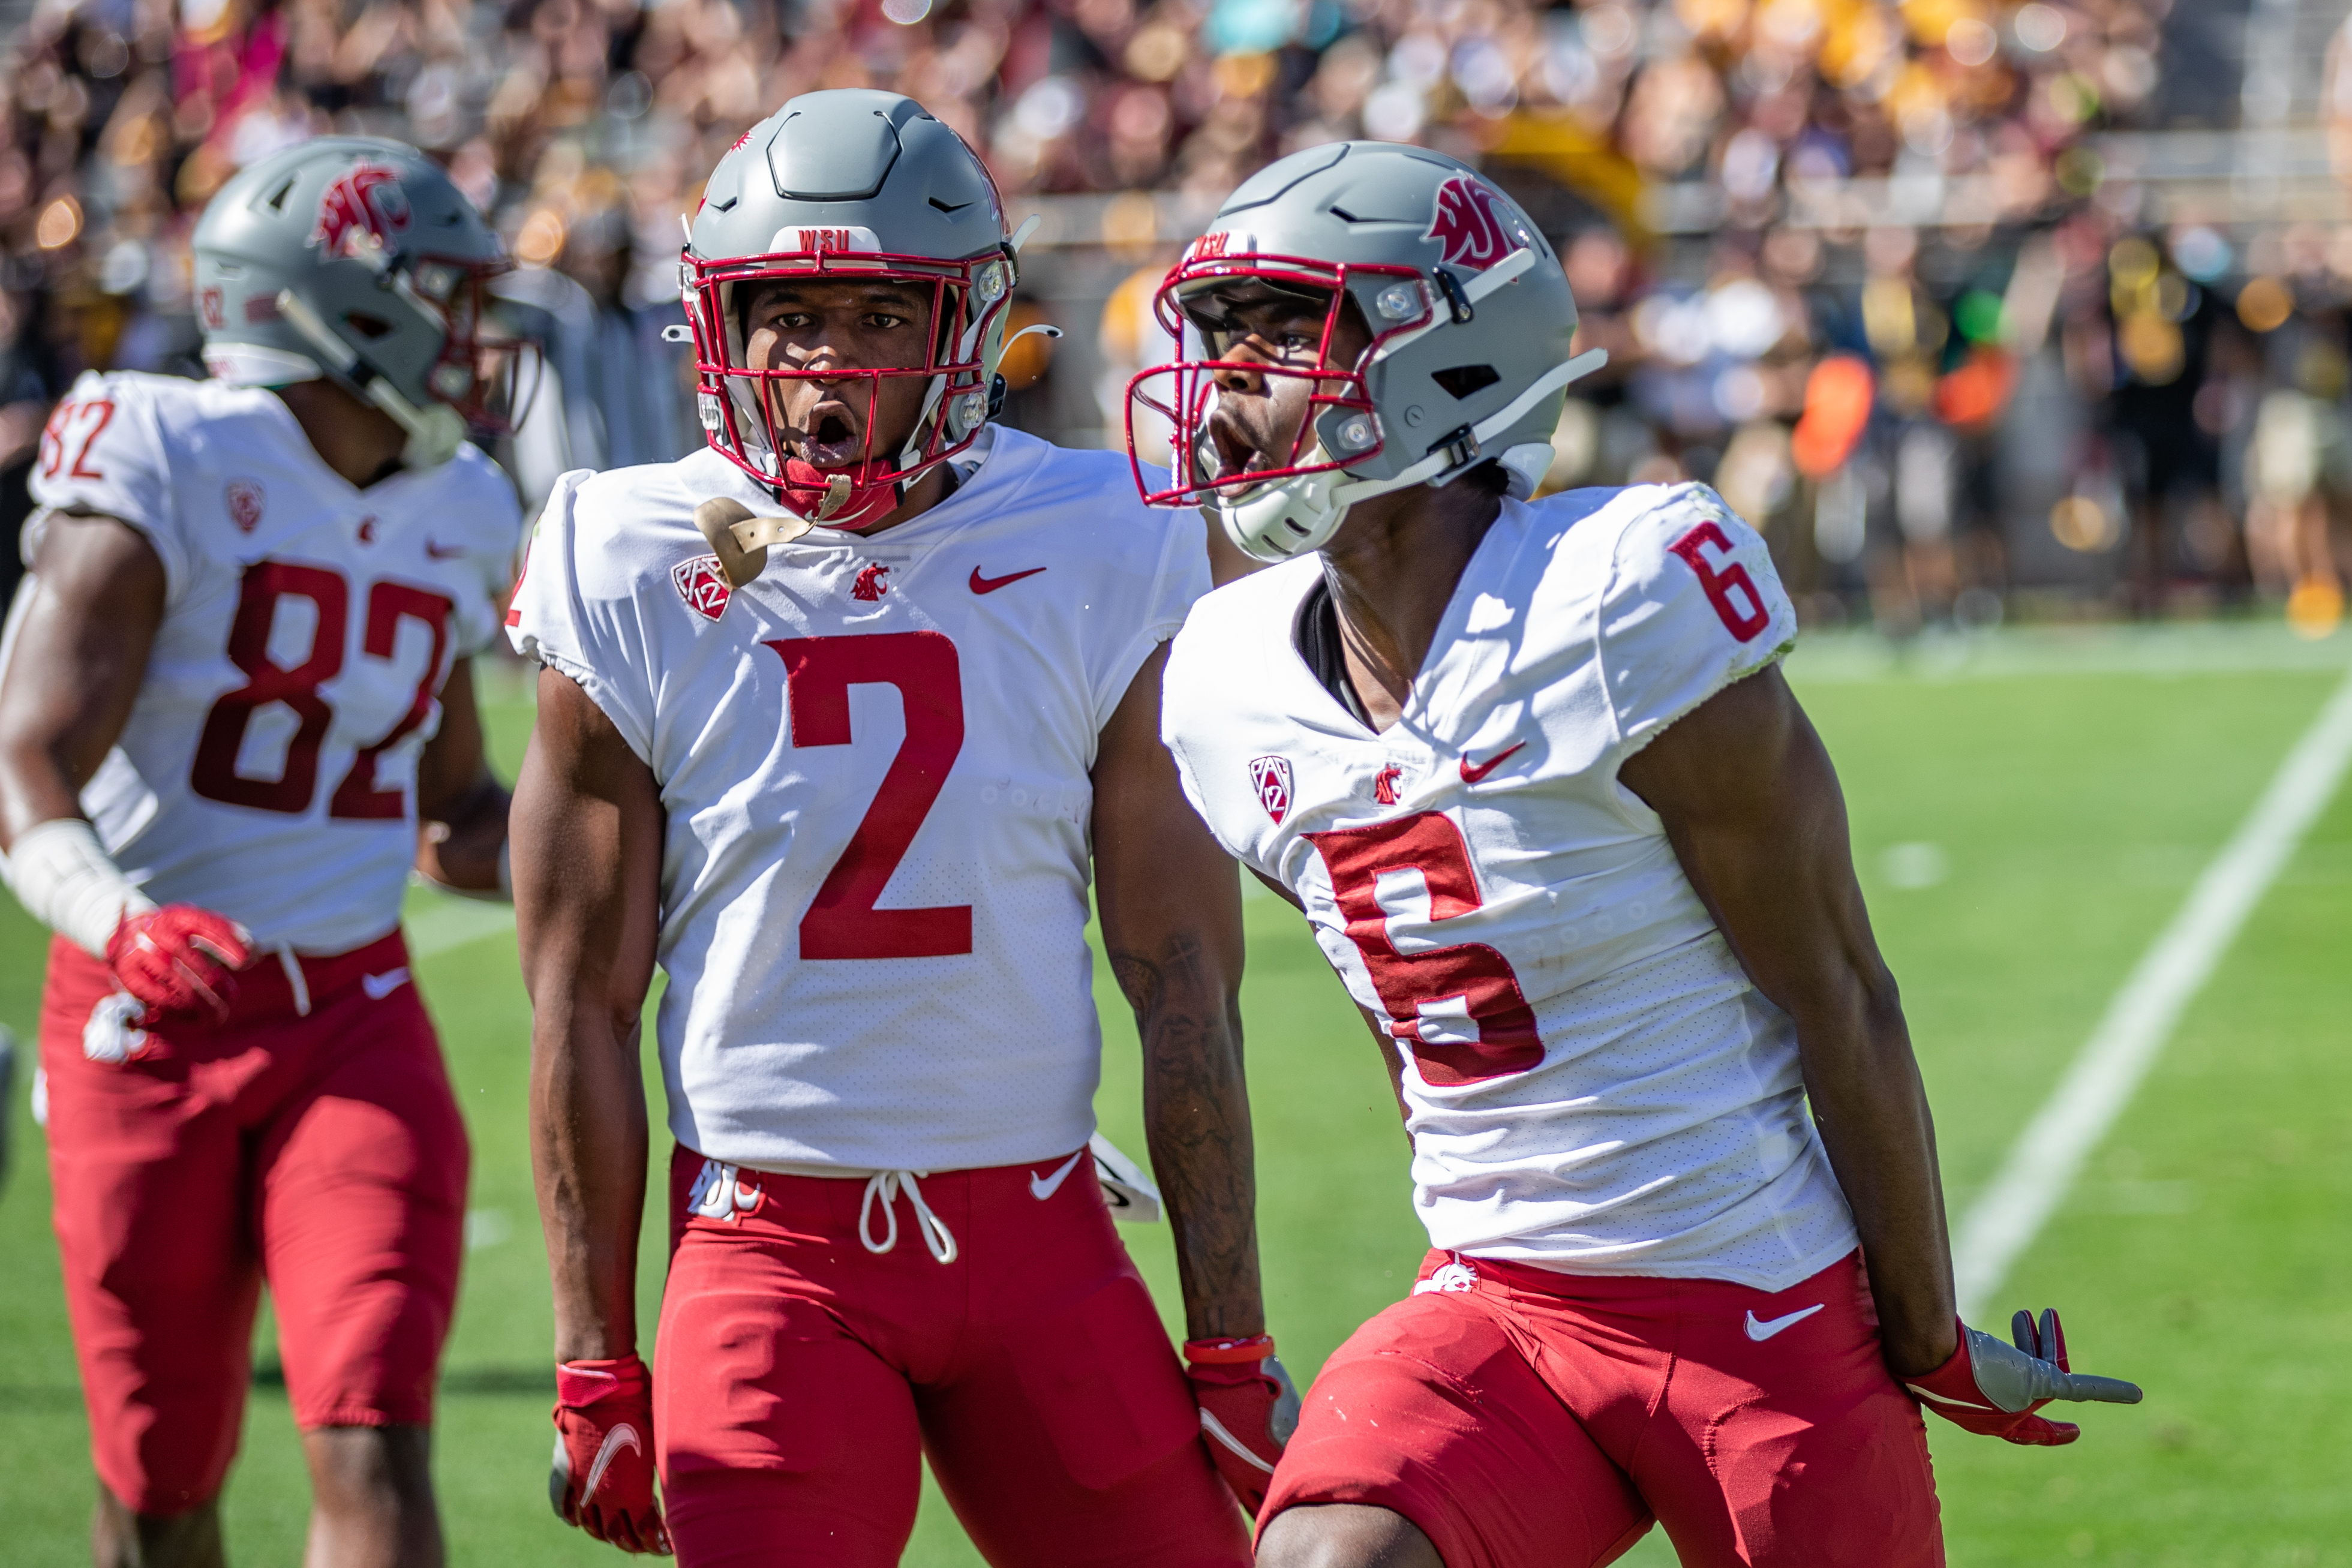 TEMPE, AZ - OCTOBER 30: Washington State cornerback Chris Jackson (2) and Chau Smith-Wade (6) celebrate an interception during the first half of a PAC 12 conference matchup between the Arizona State Sun Devils and the Washington State Cougars on October 30, 2021, at Sun Devil Stadium in Tempe, AZ.